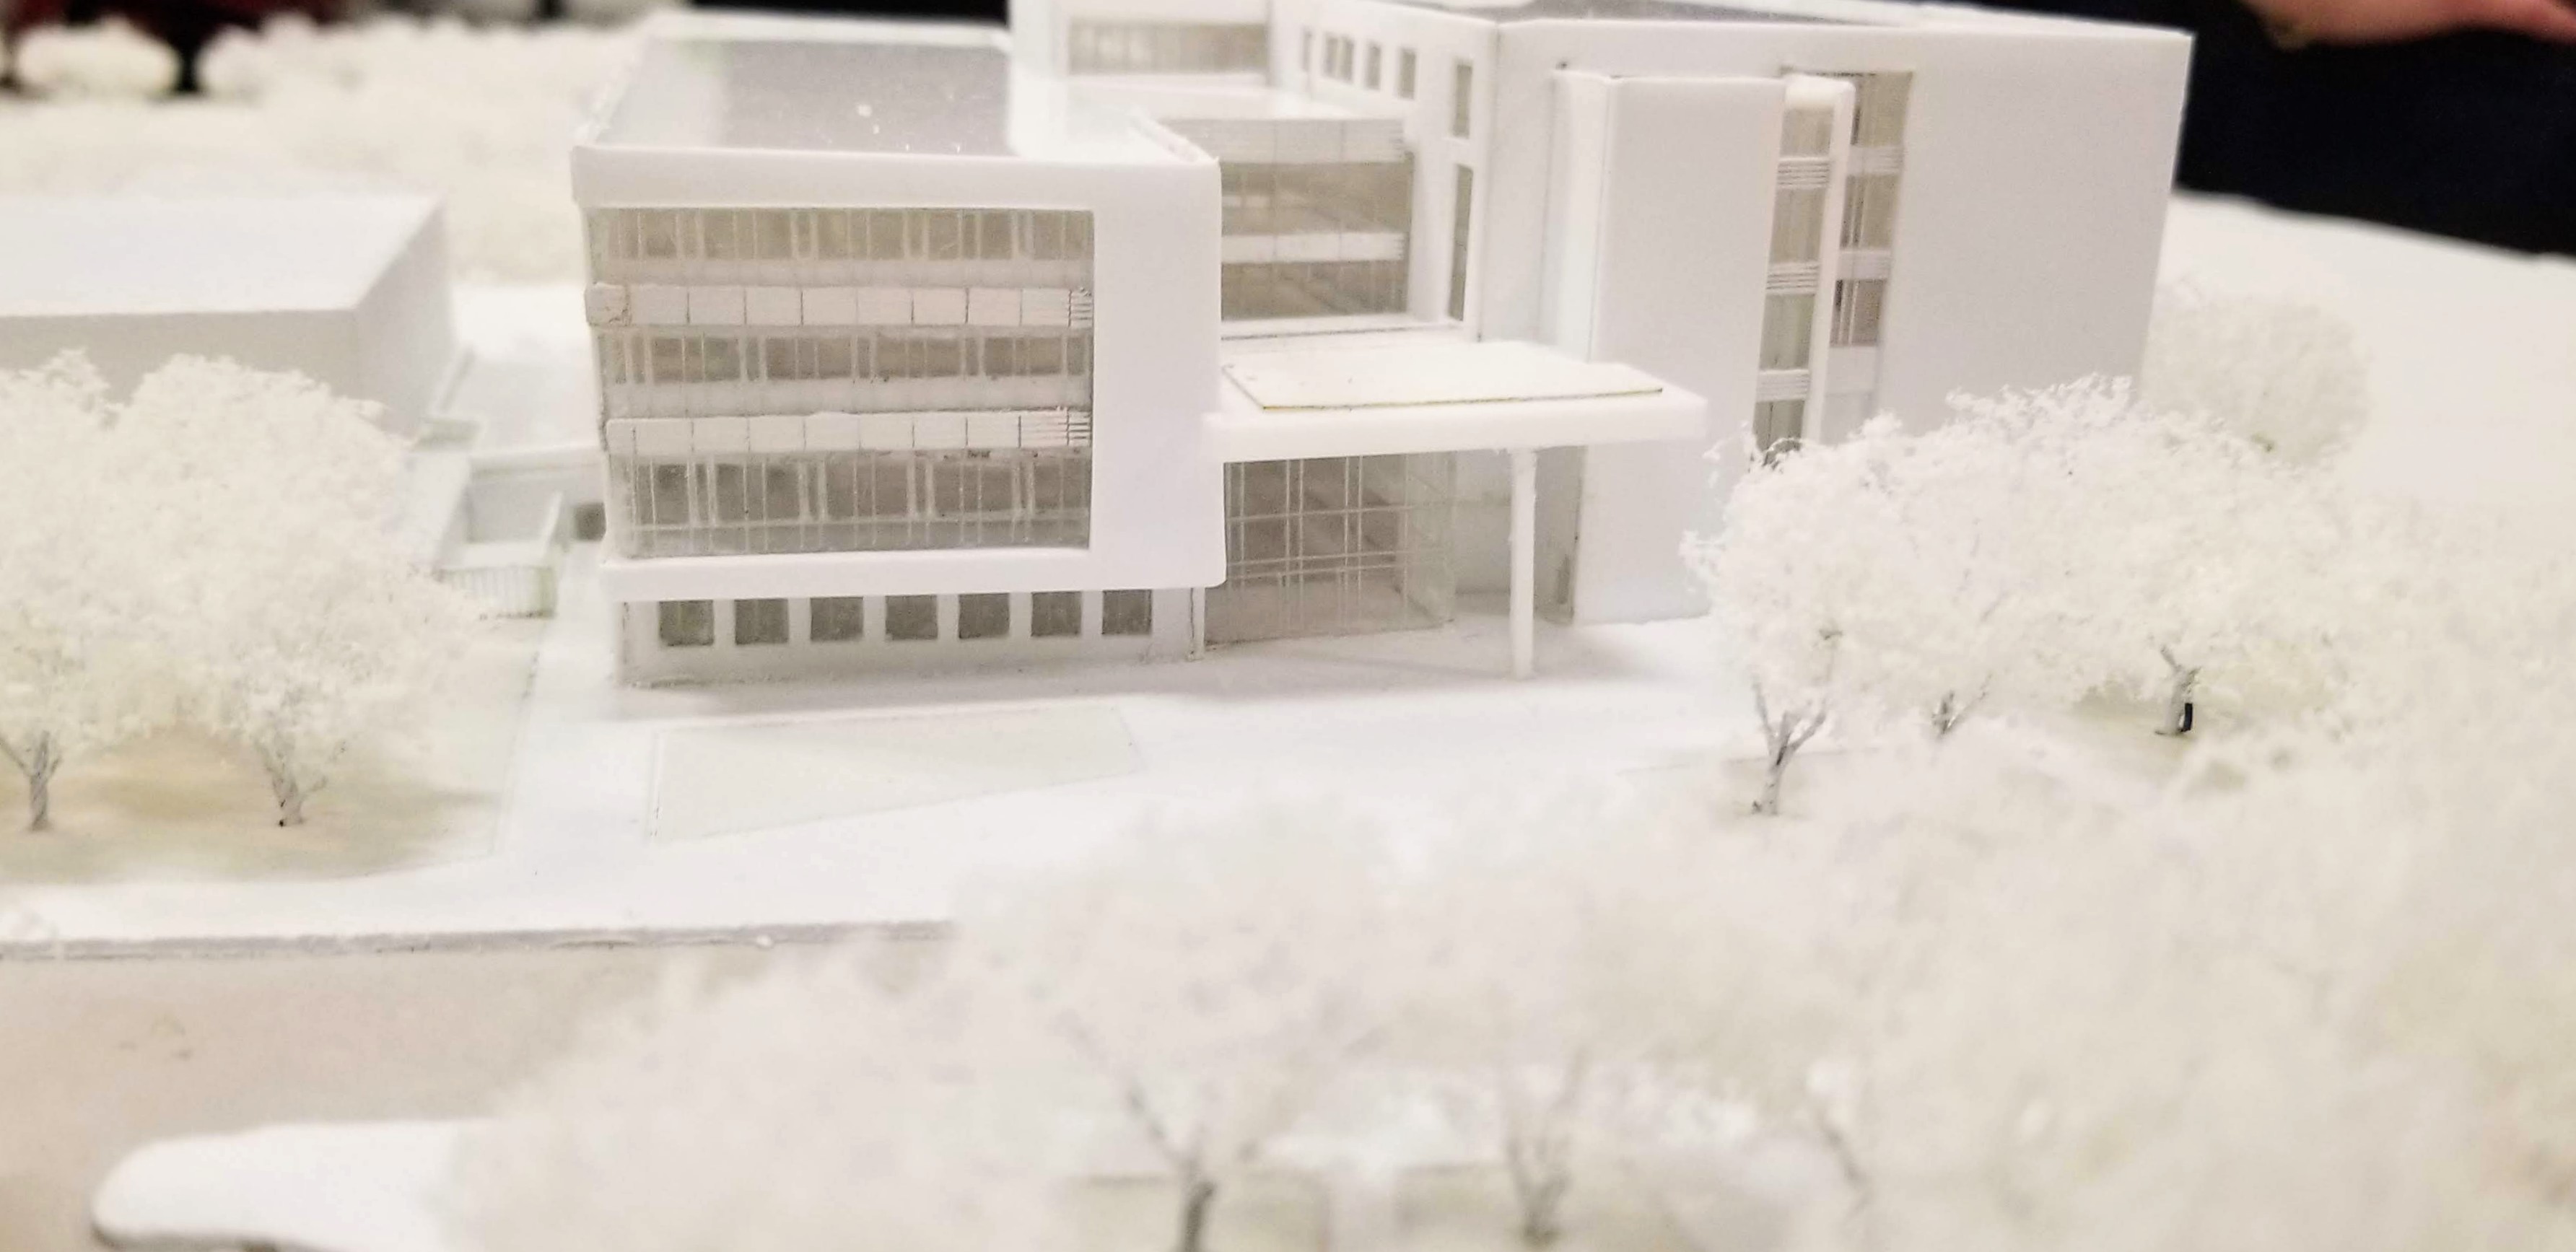 architectural model of the George Mason High School